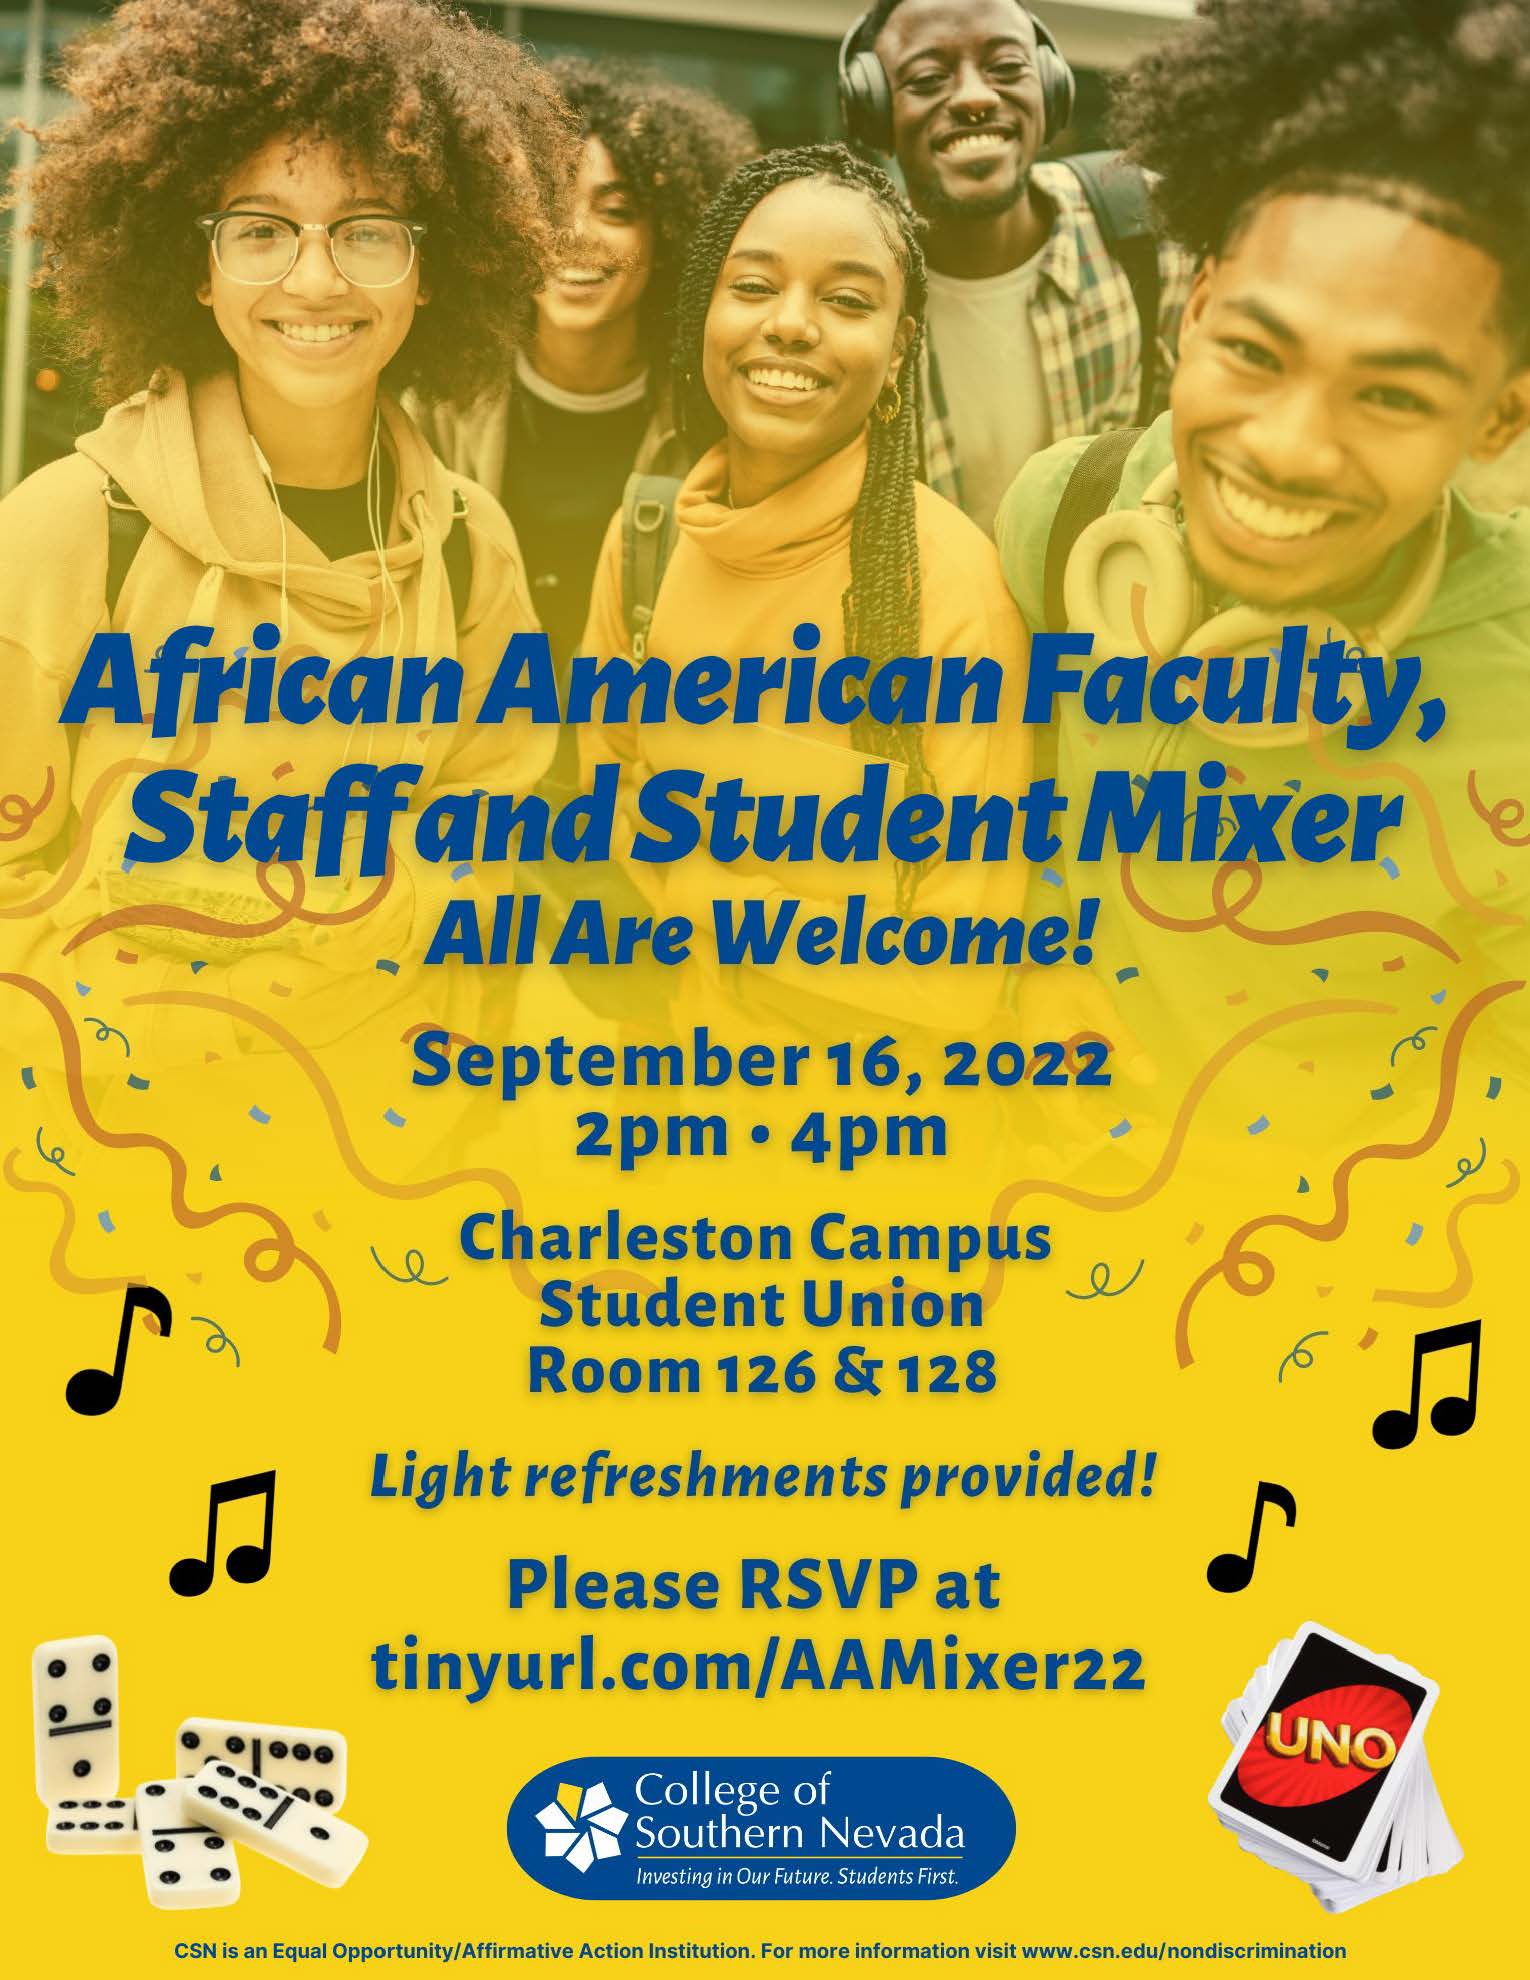 African American Faculty, Staff and Student mixer September 16 event flyer